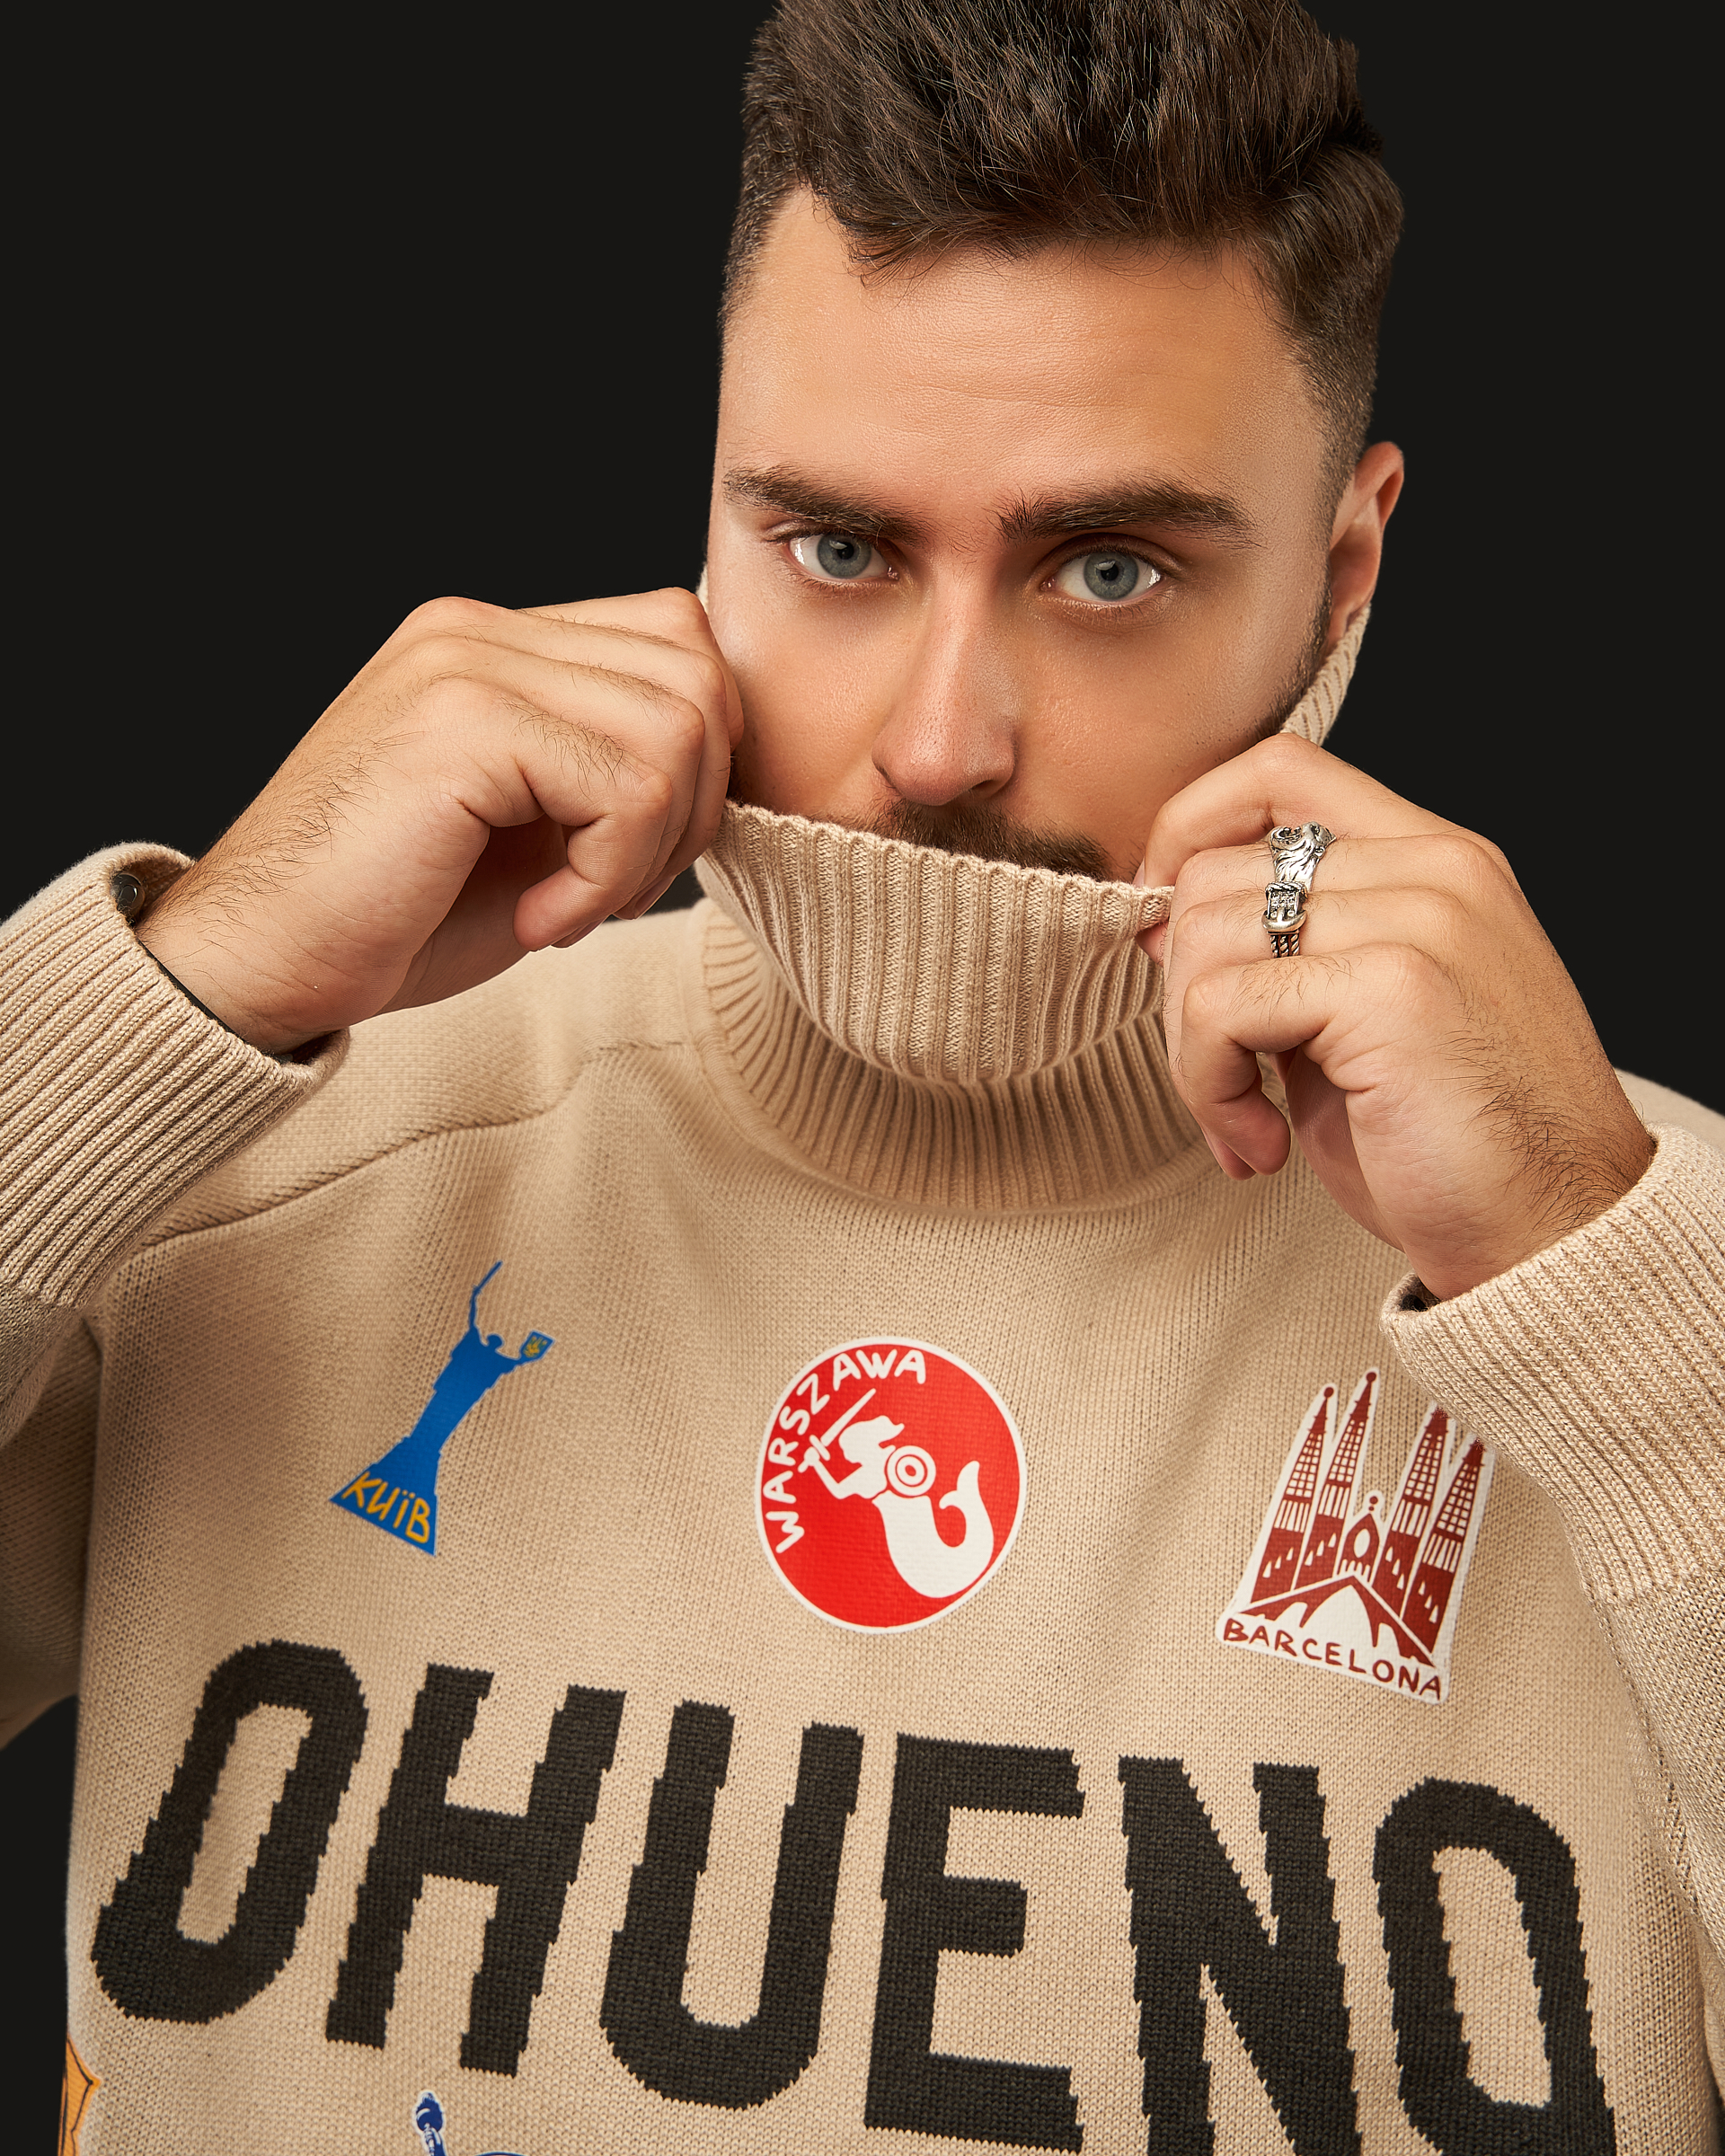 Pullover (beige) Image: https://ohueno-official.com/wp-content/uploads/m01952-1.jpg